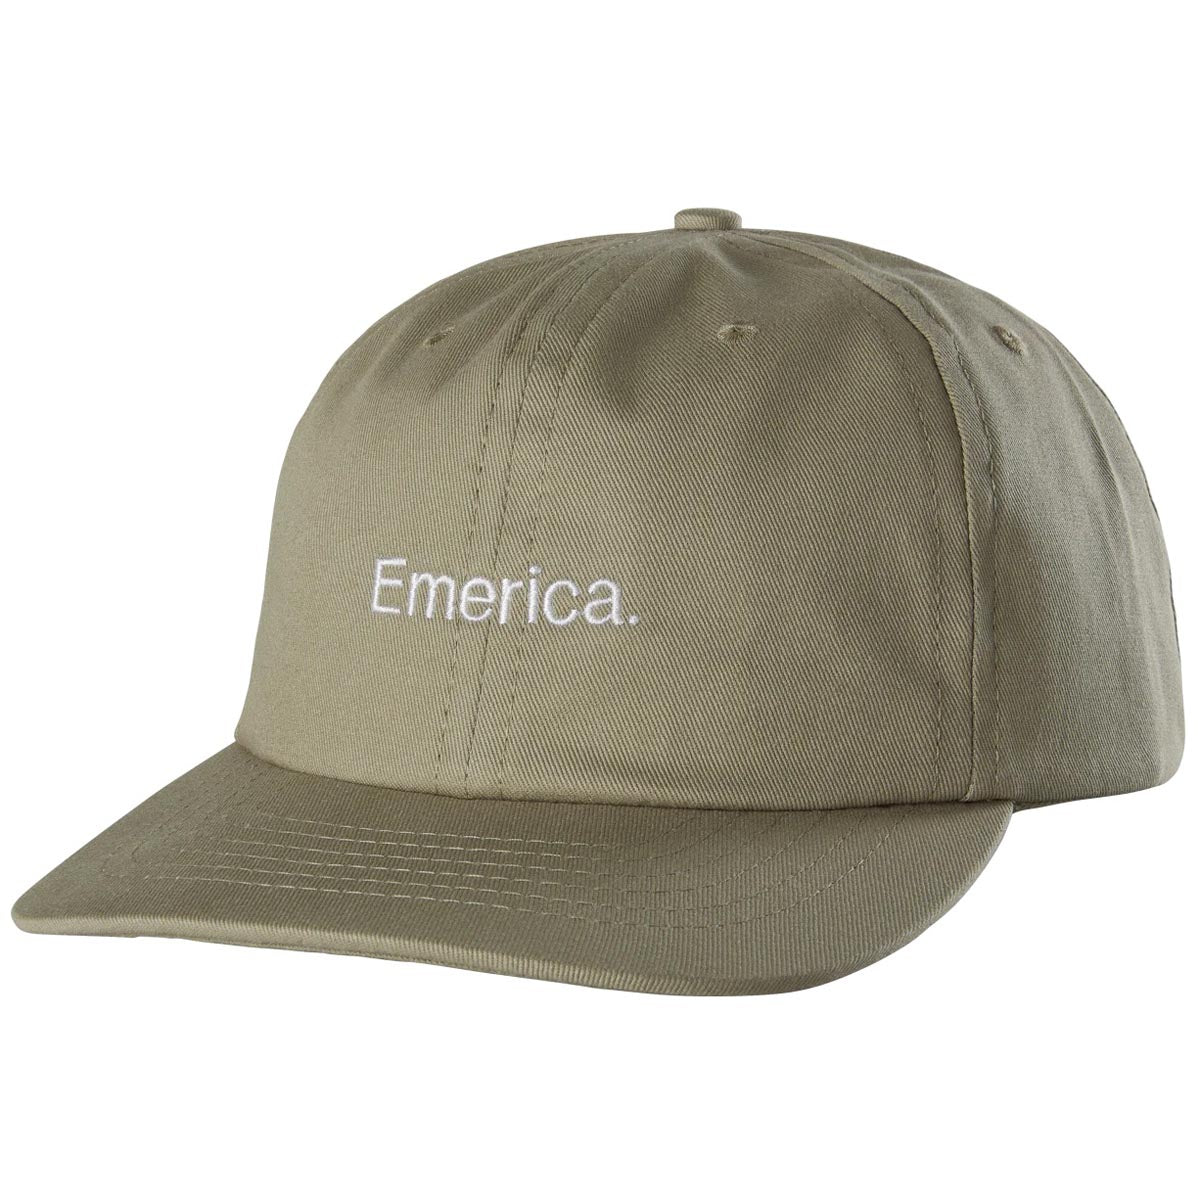 Emerica Pure Gold Dad Hat - Brown image 1